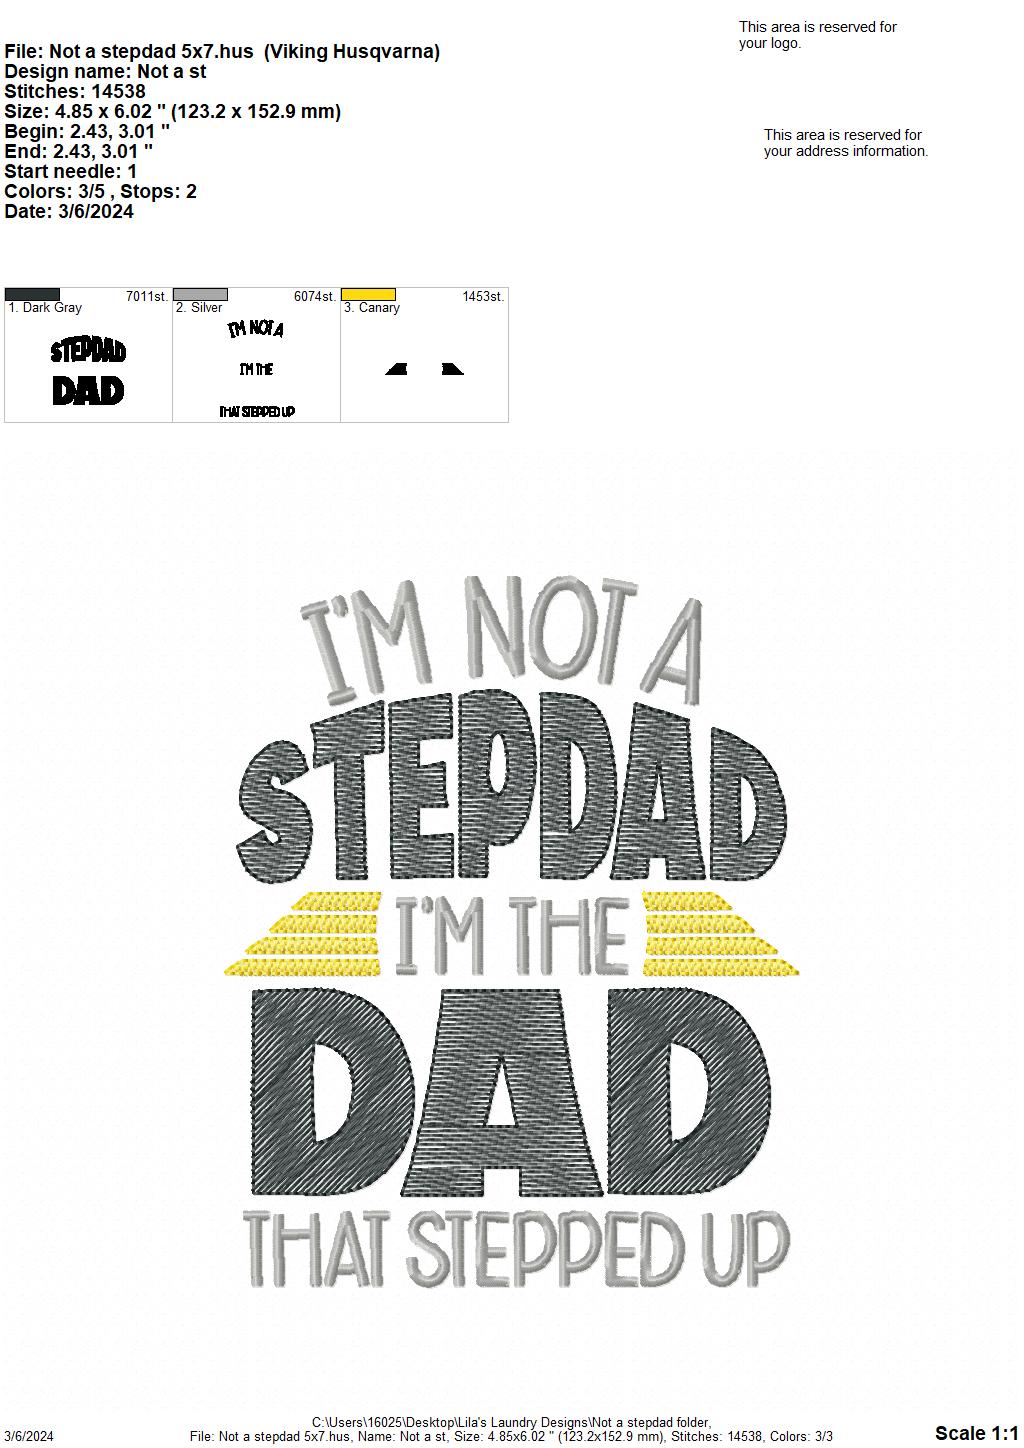 Not A Stepdad - 4 Sizes - Digital Embroidery Design